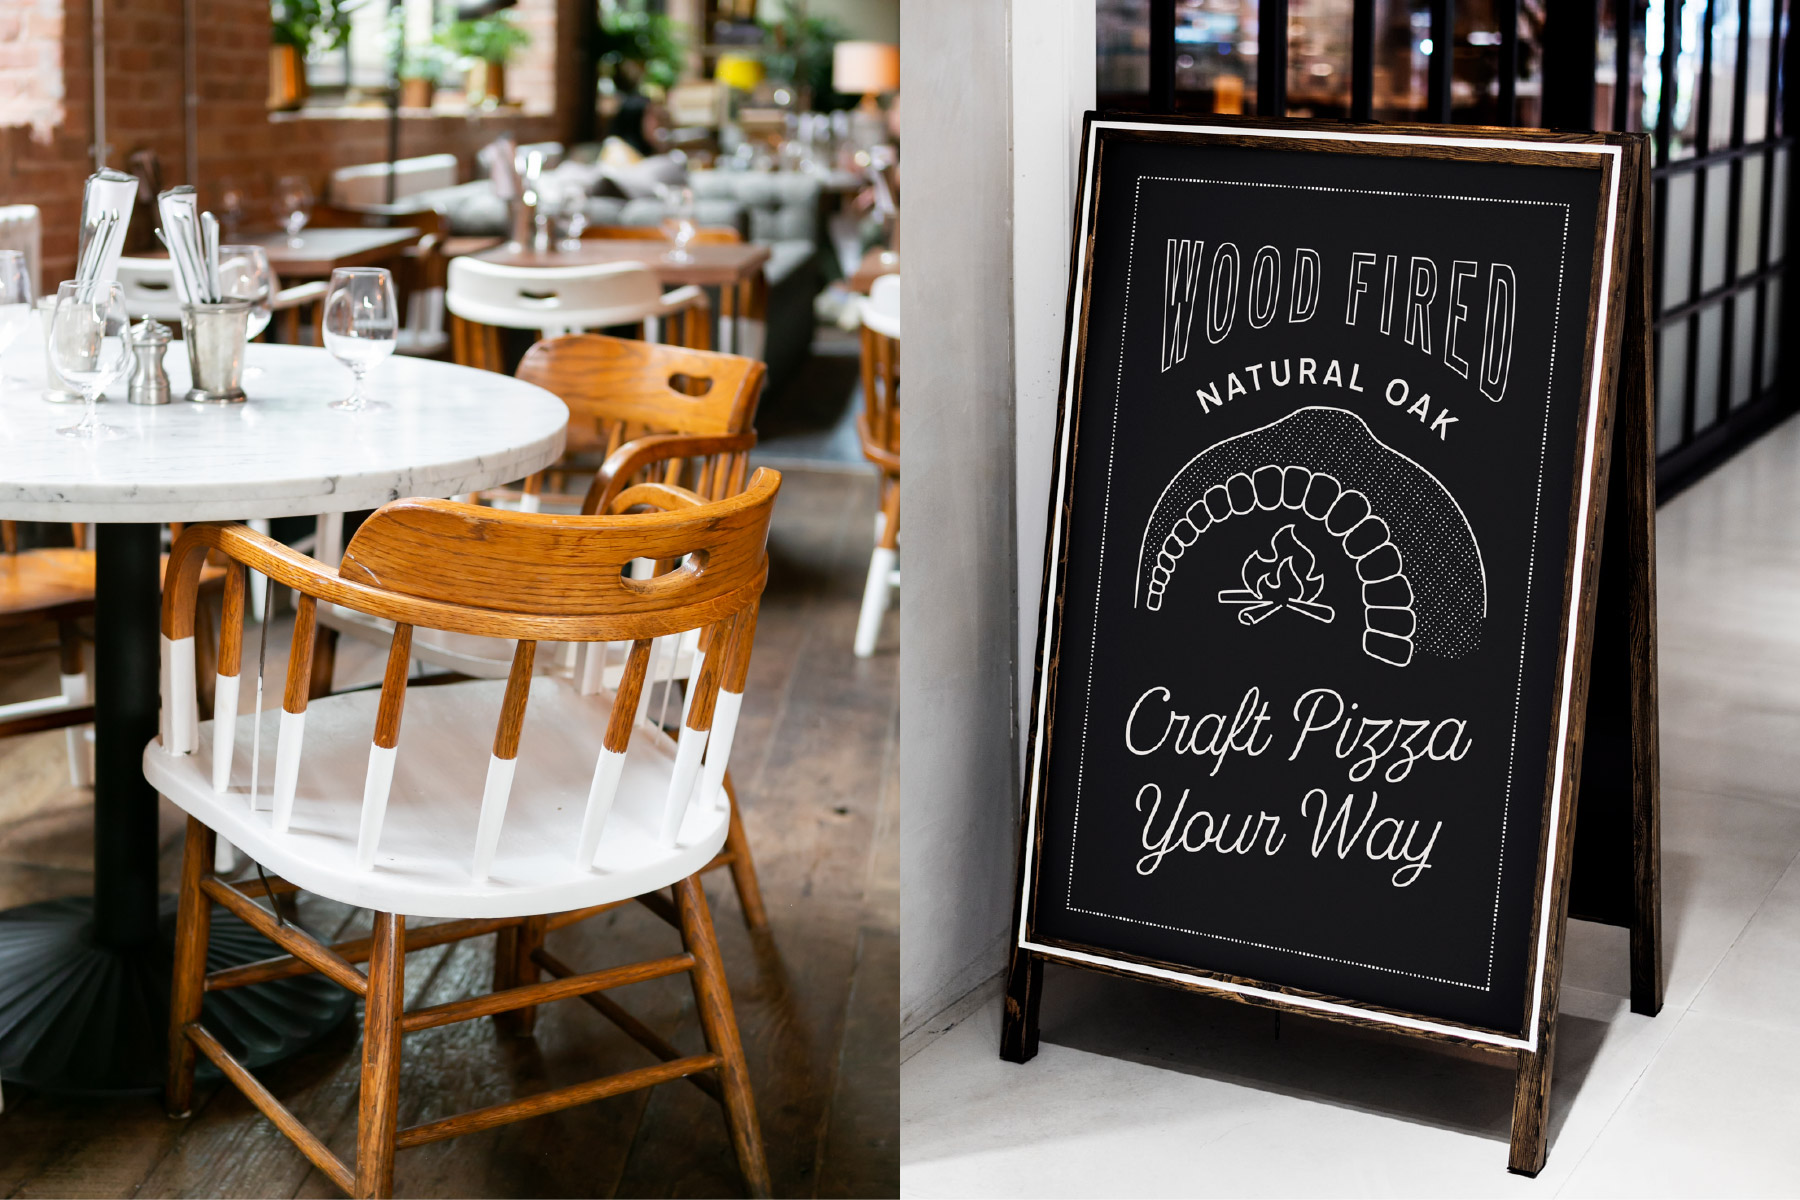 blackboard signage artwork for wood fired pizza crafted your way